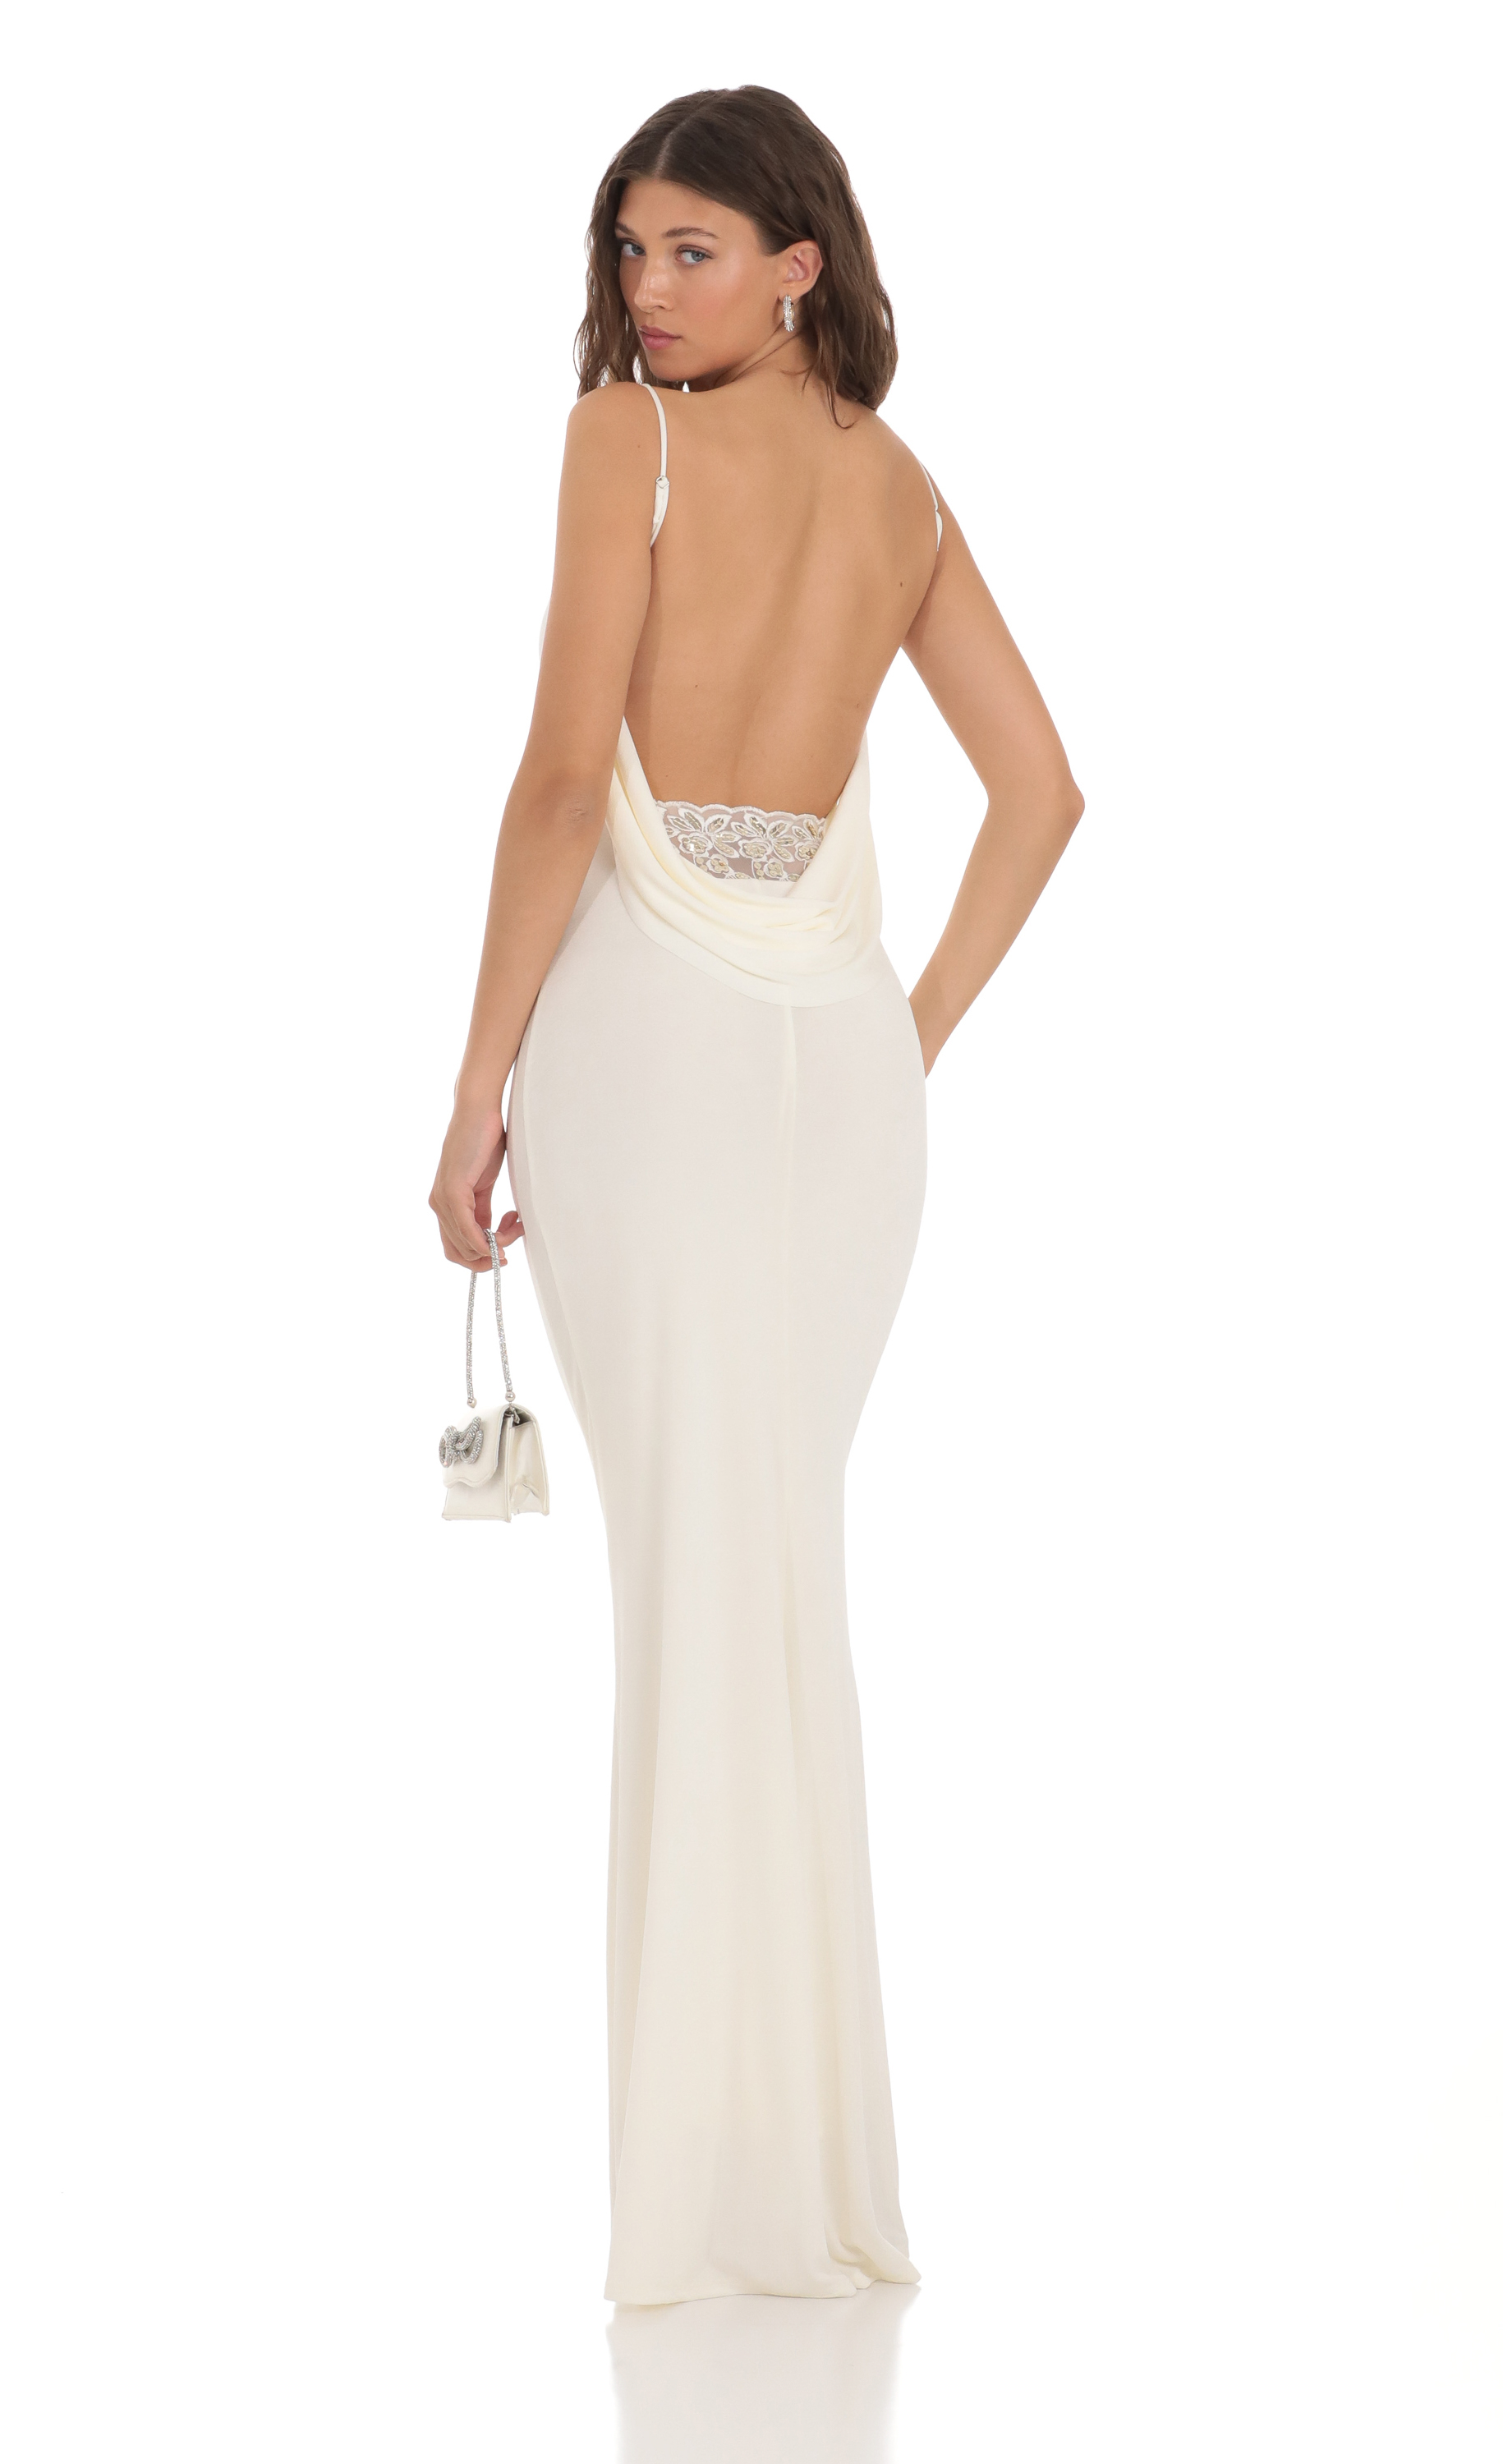 Mira Lace Open Back Maxi Dress in White